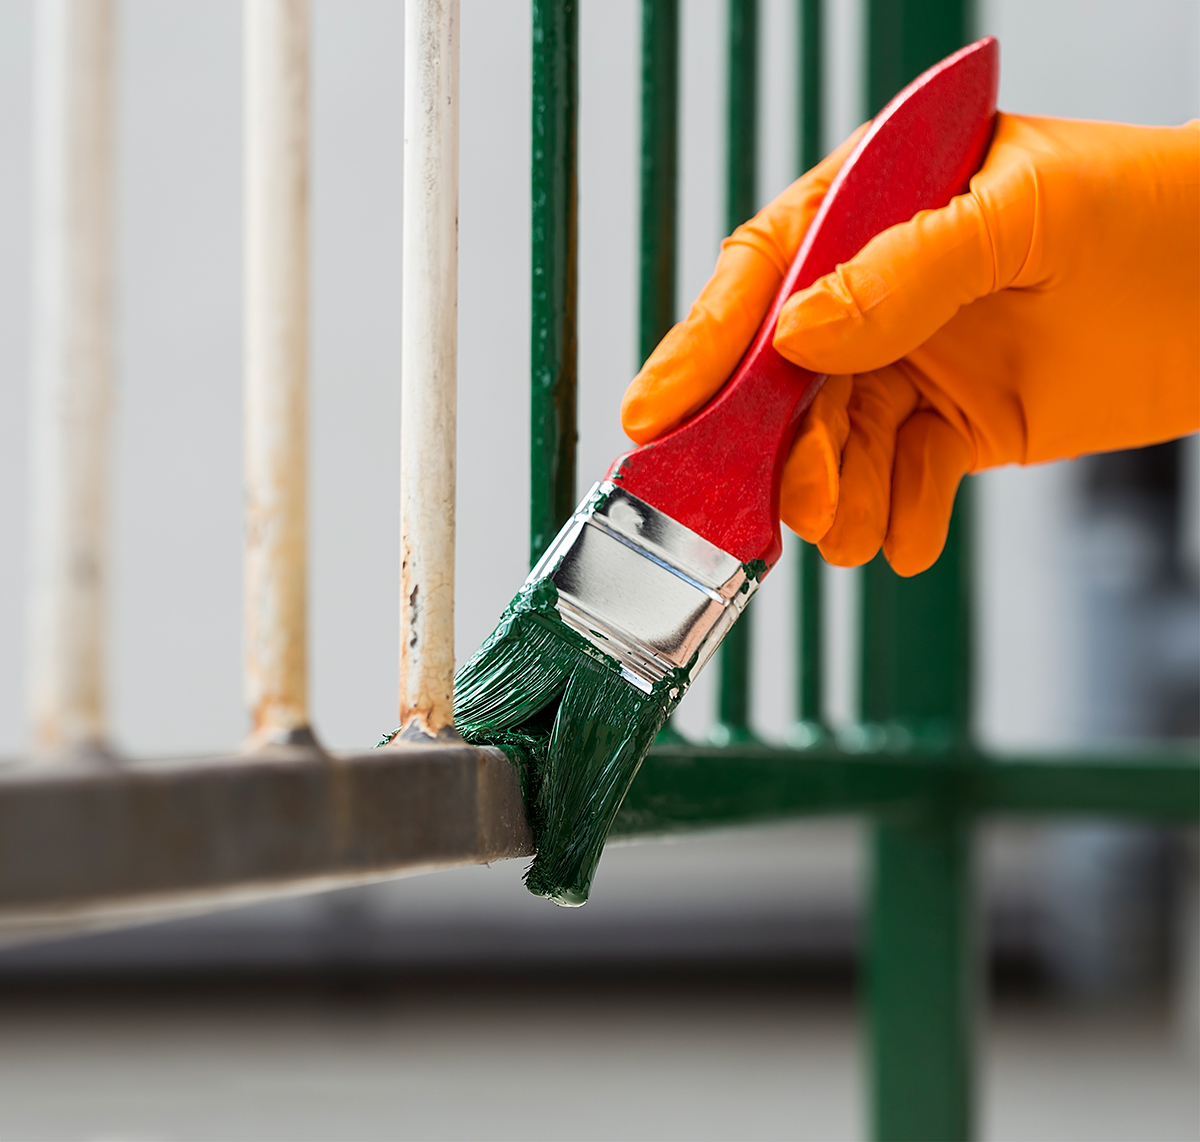 A gloved hand holding a paint brush dipped in green paint, painting a metal railing